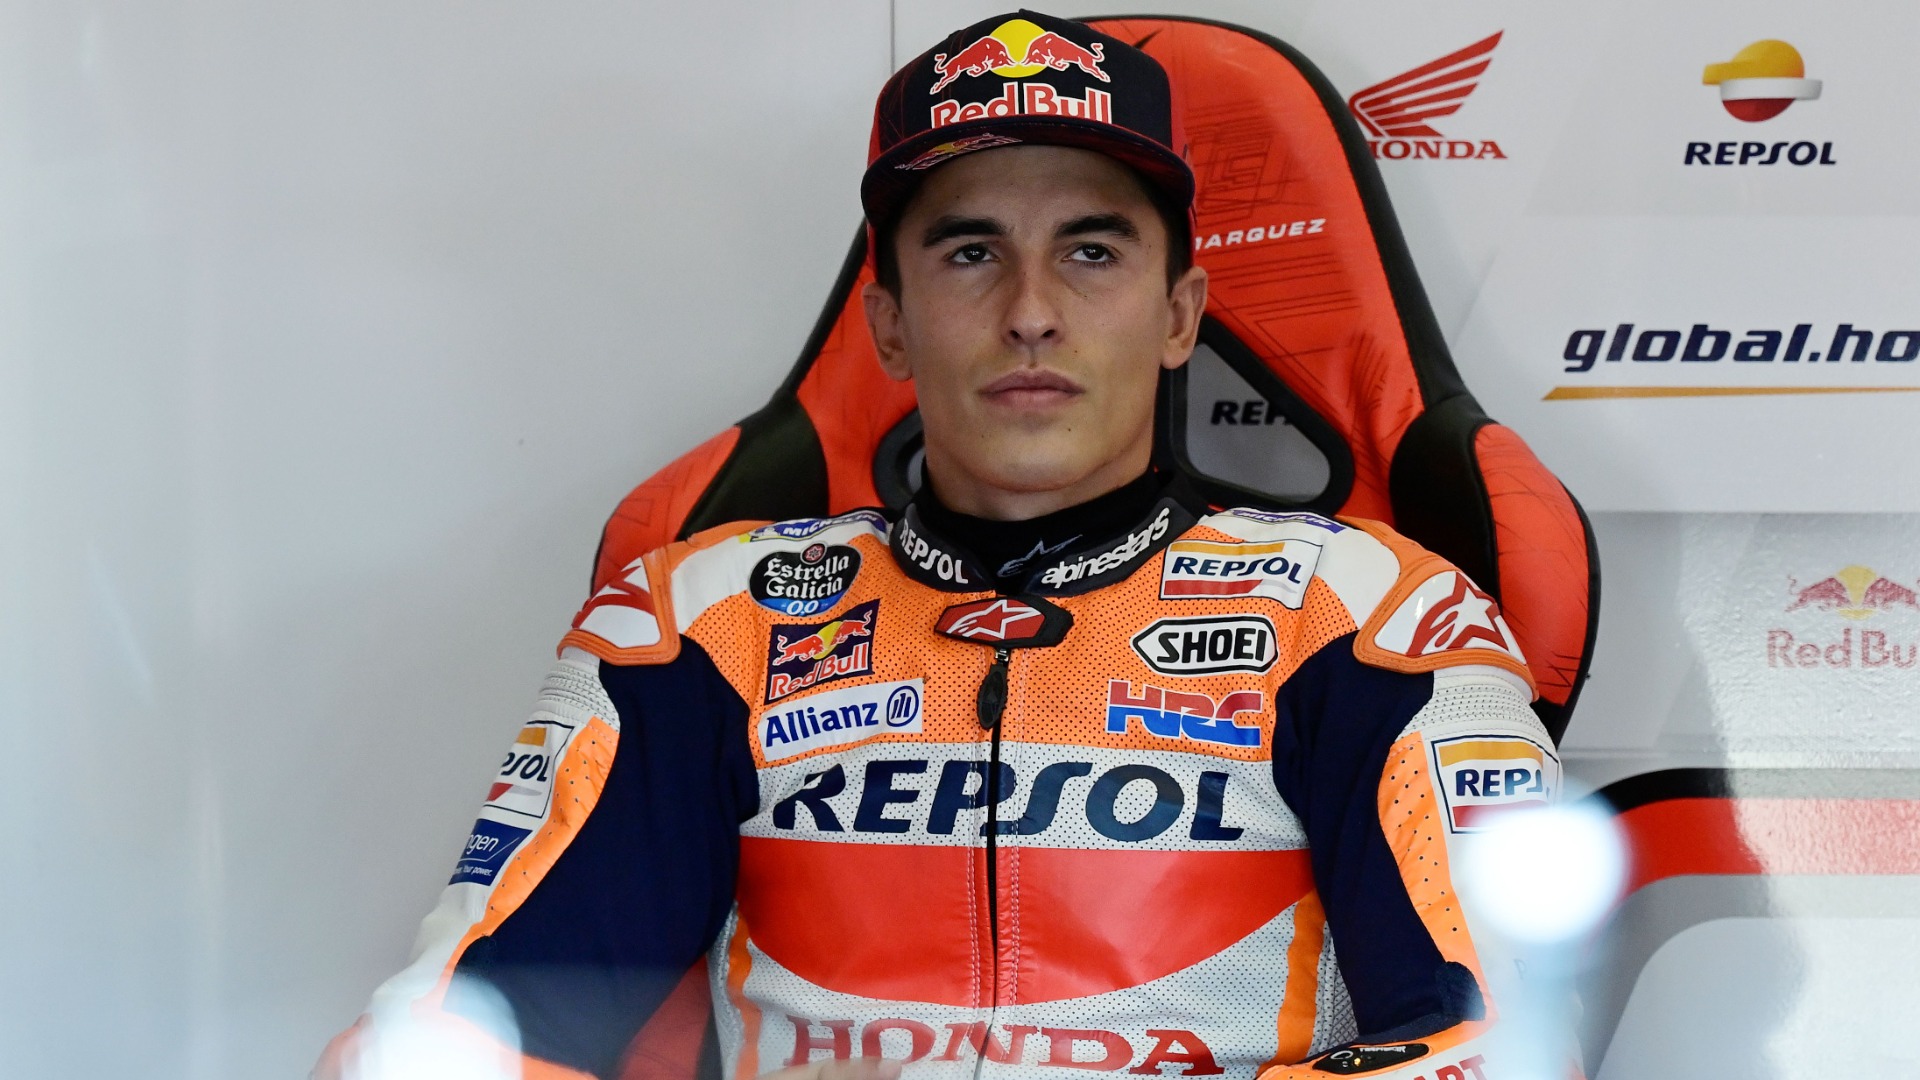 Following three operations and antibiotic therapy, Marc Marquez has been permitted to take the next step in his recovery from an arm injury.